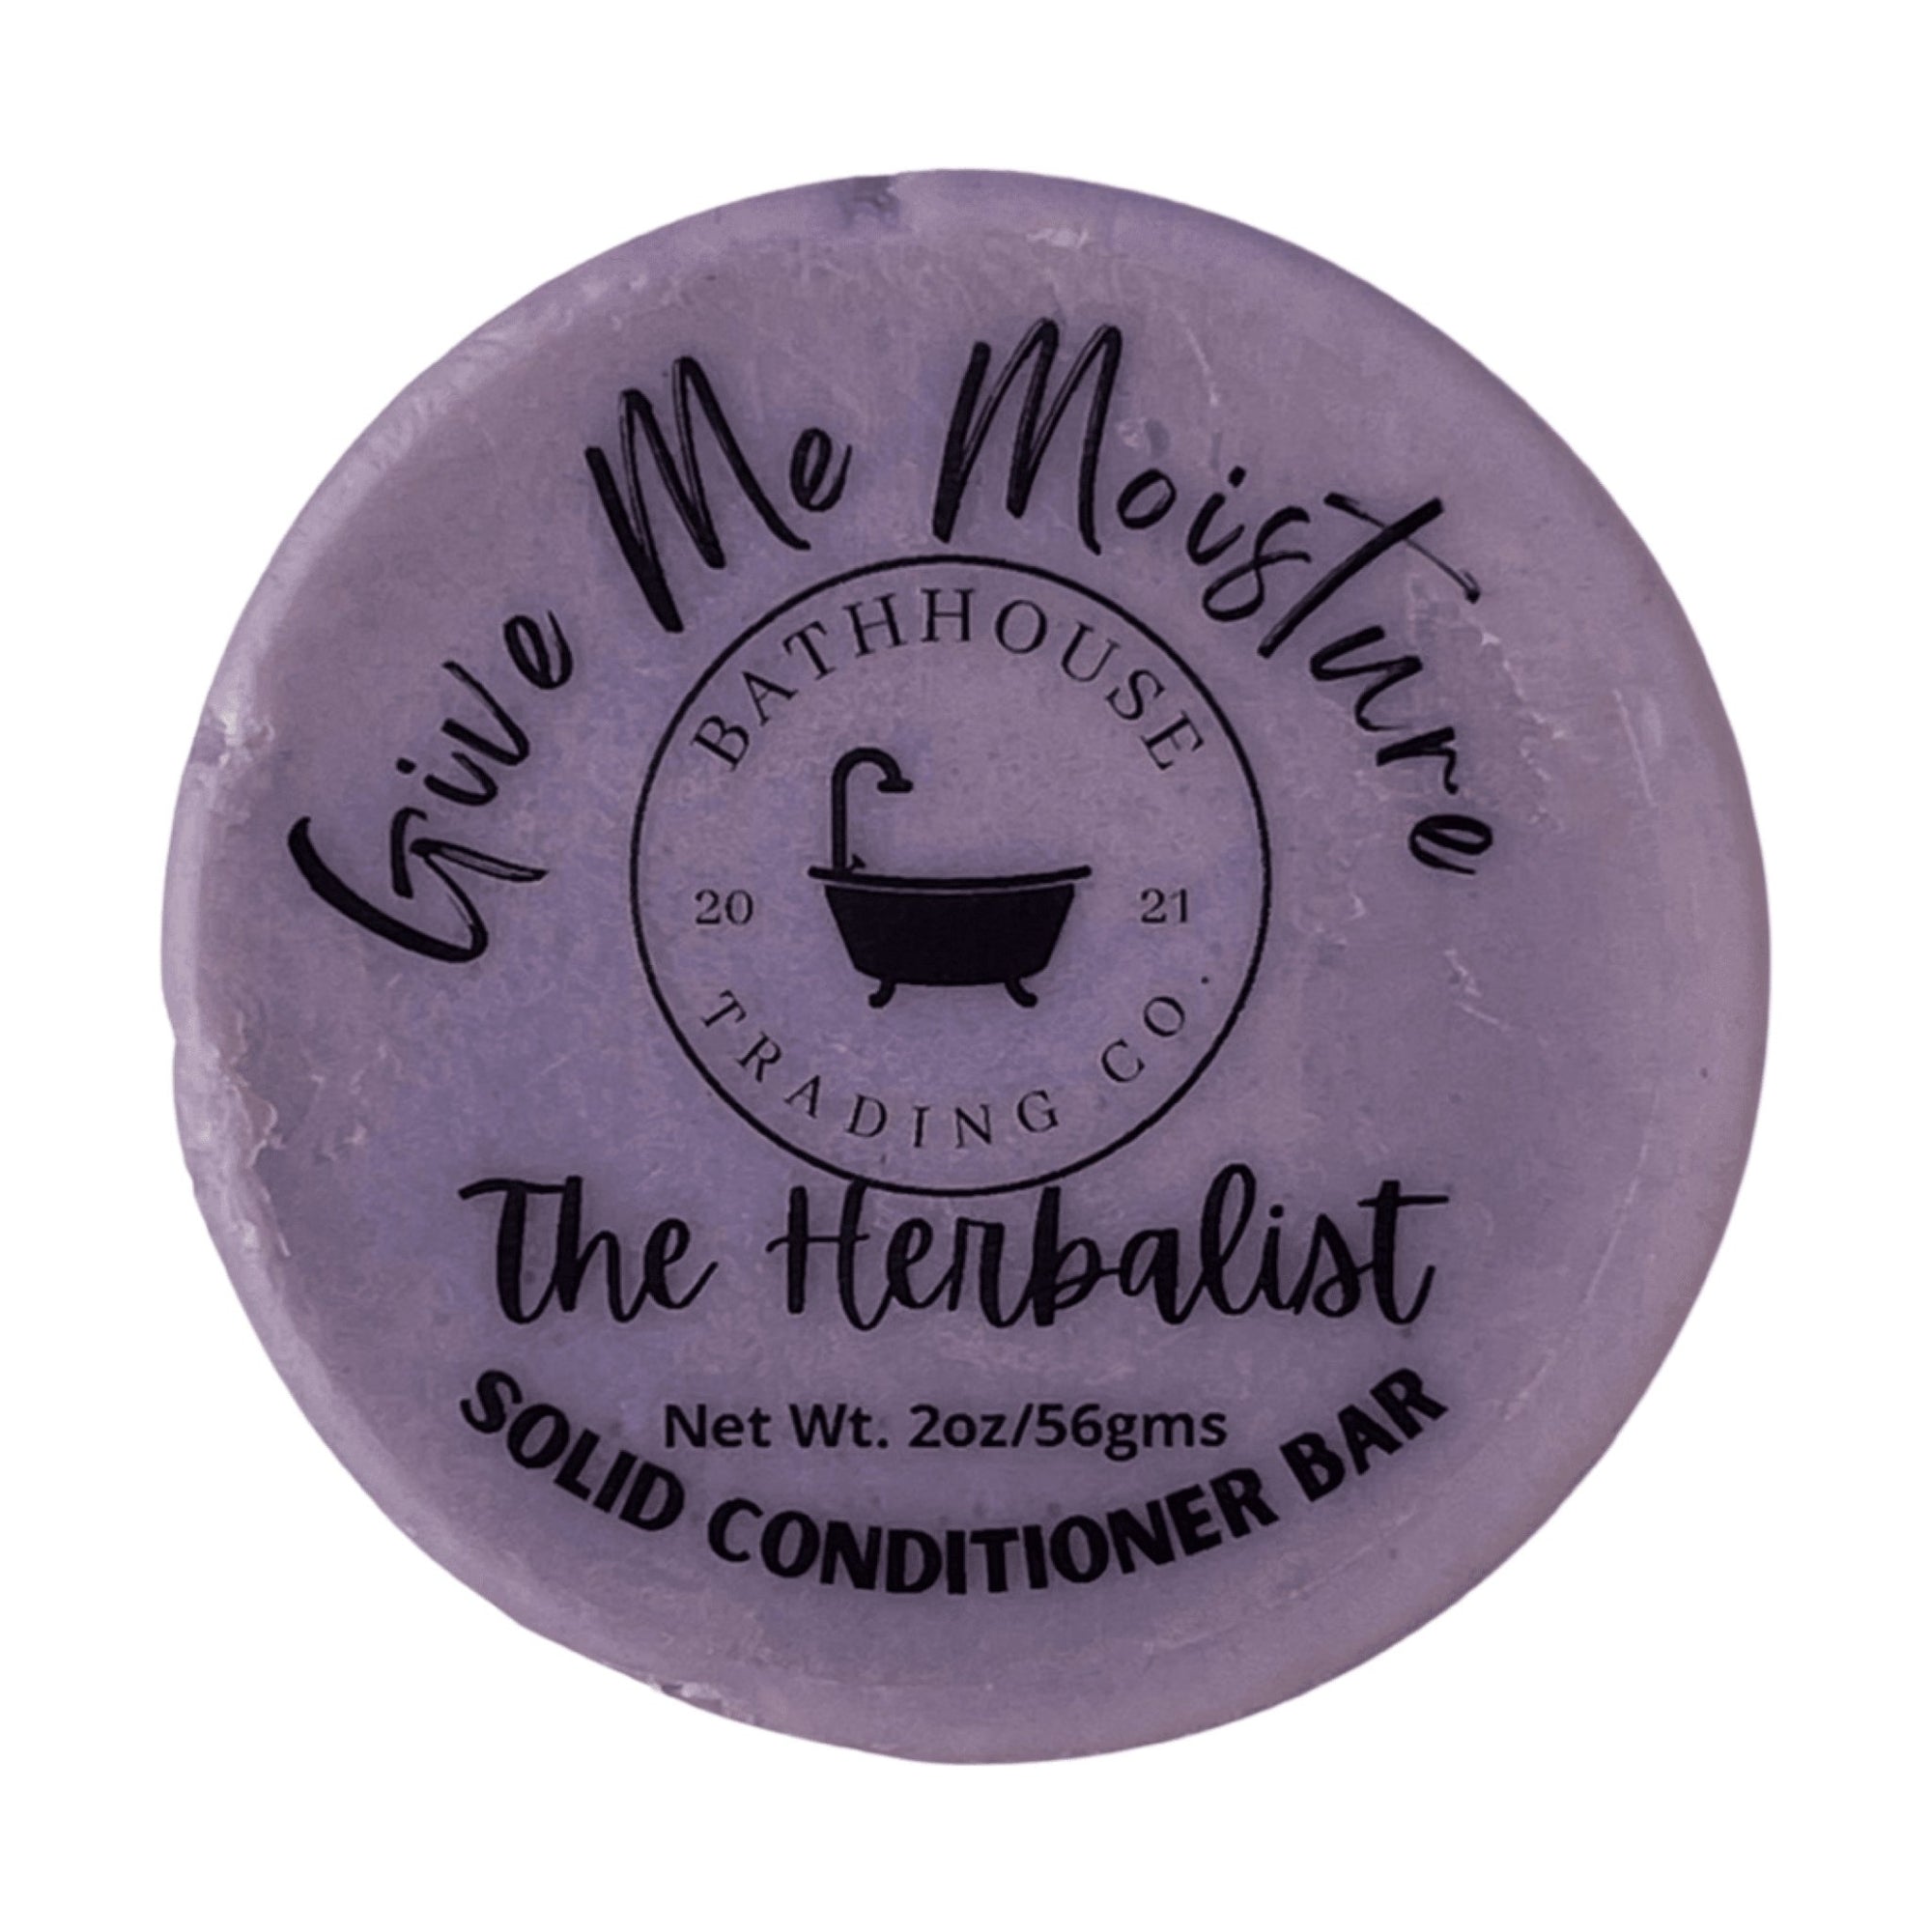 The Herbalist Solid Conditioner - Bathhouse Trading Company